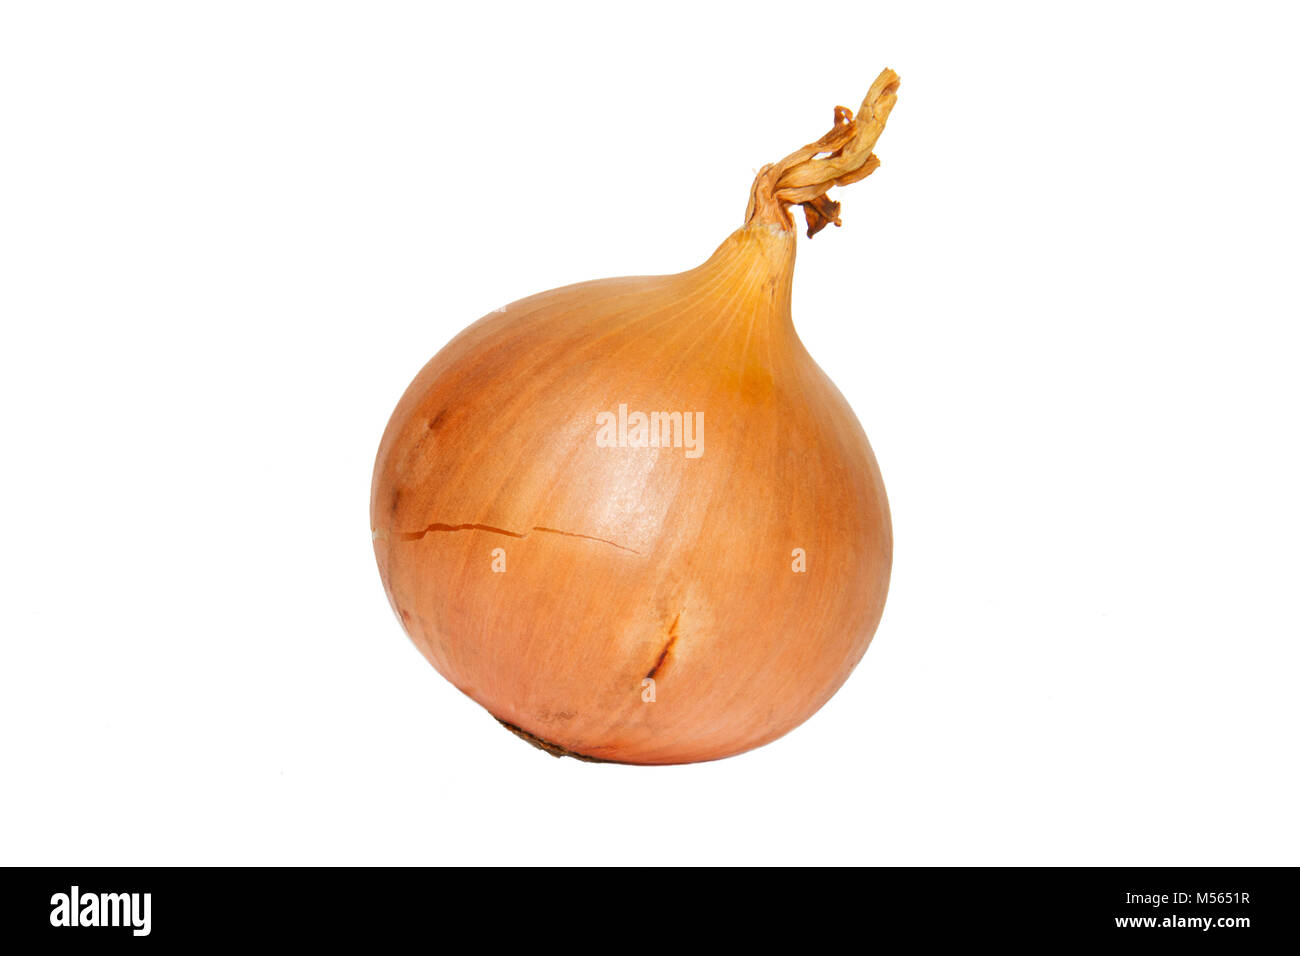 Onion, isolated on a white background Stock Photo